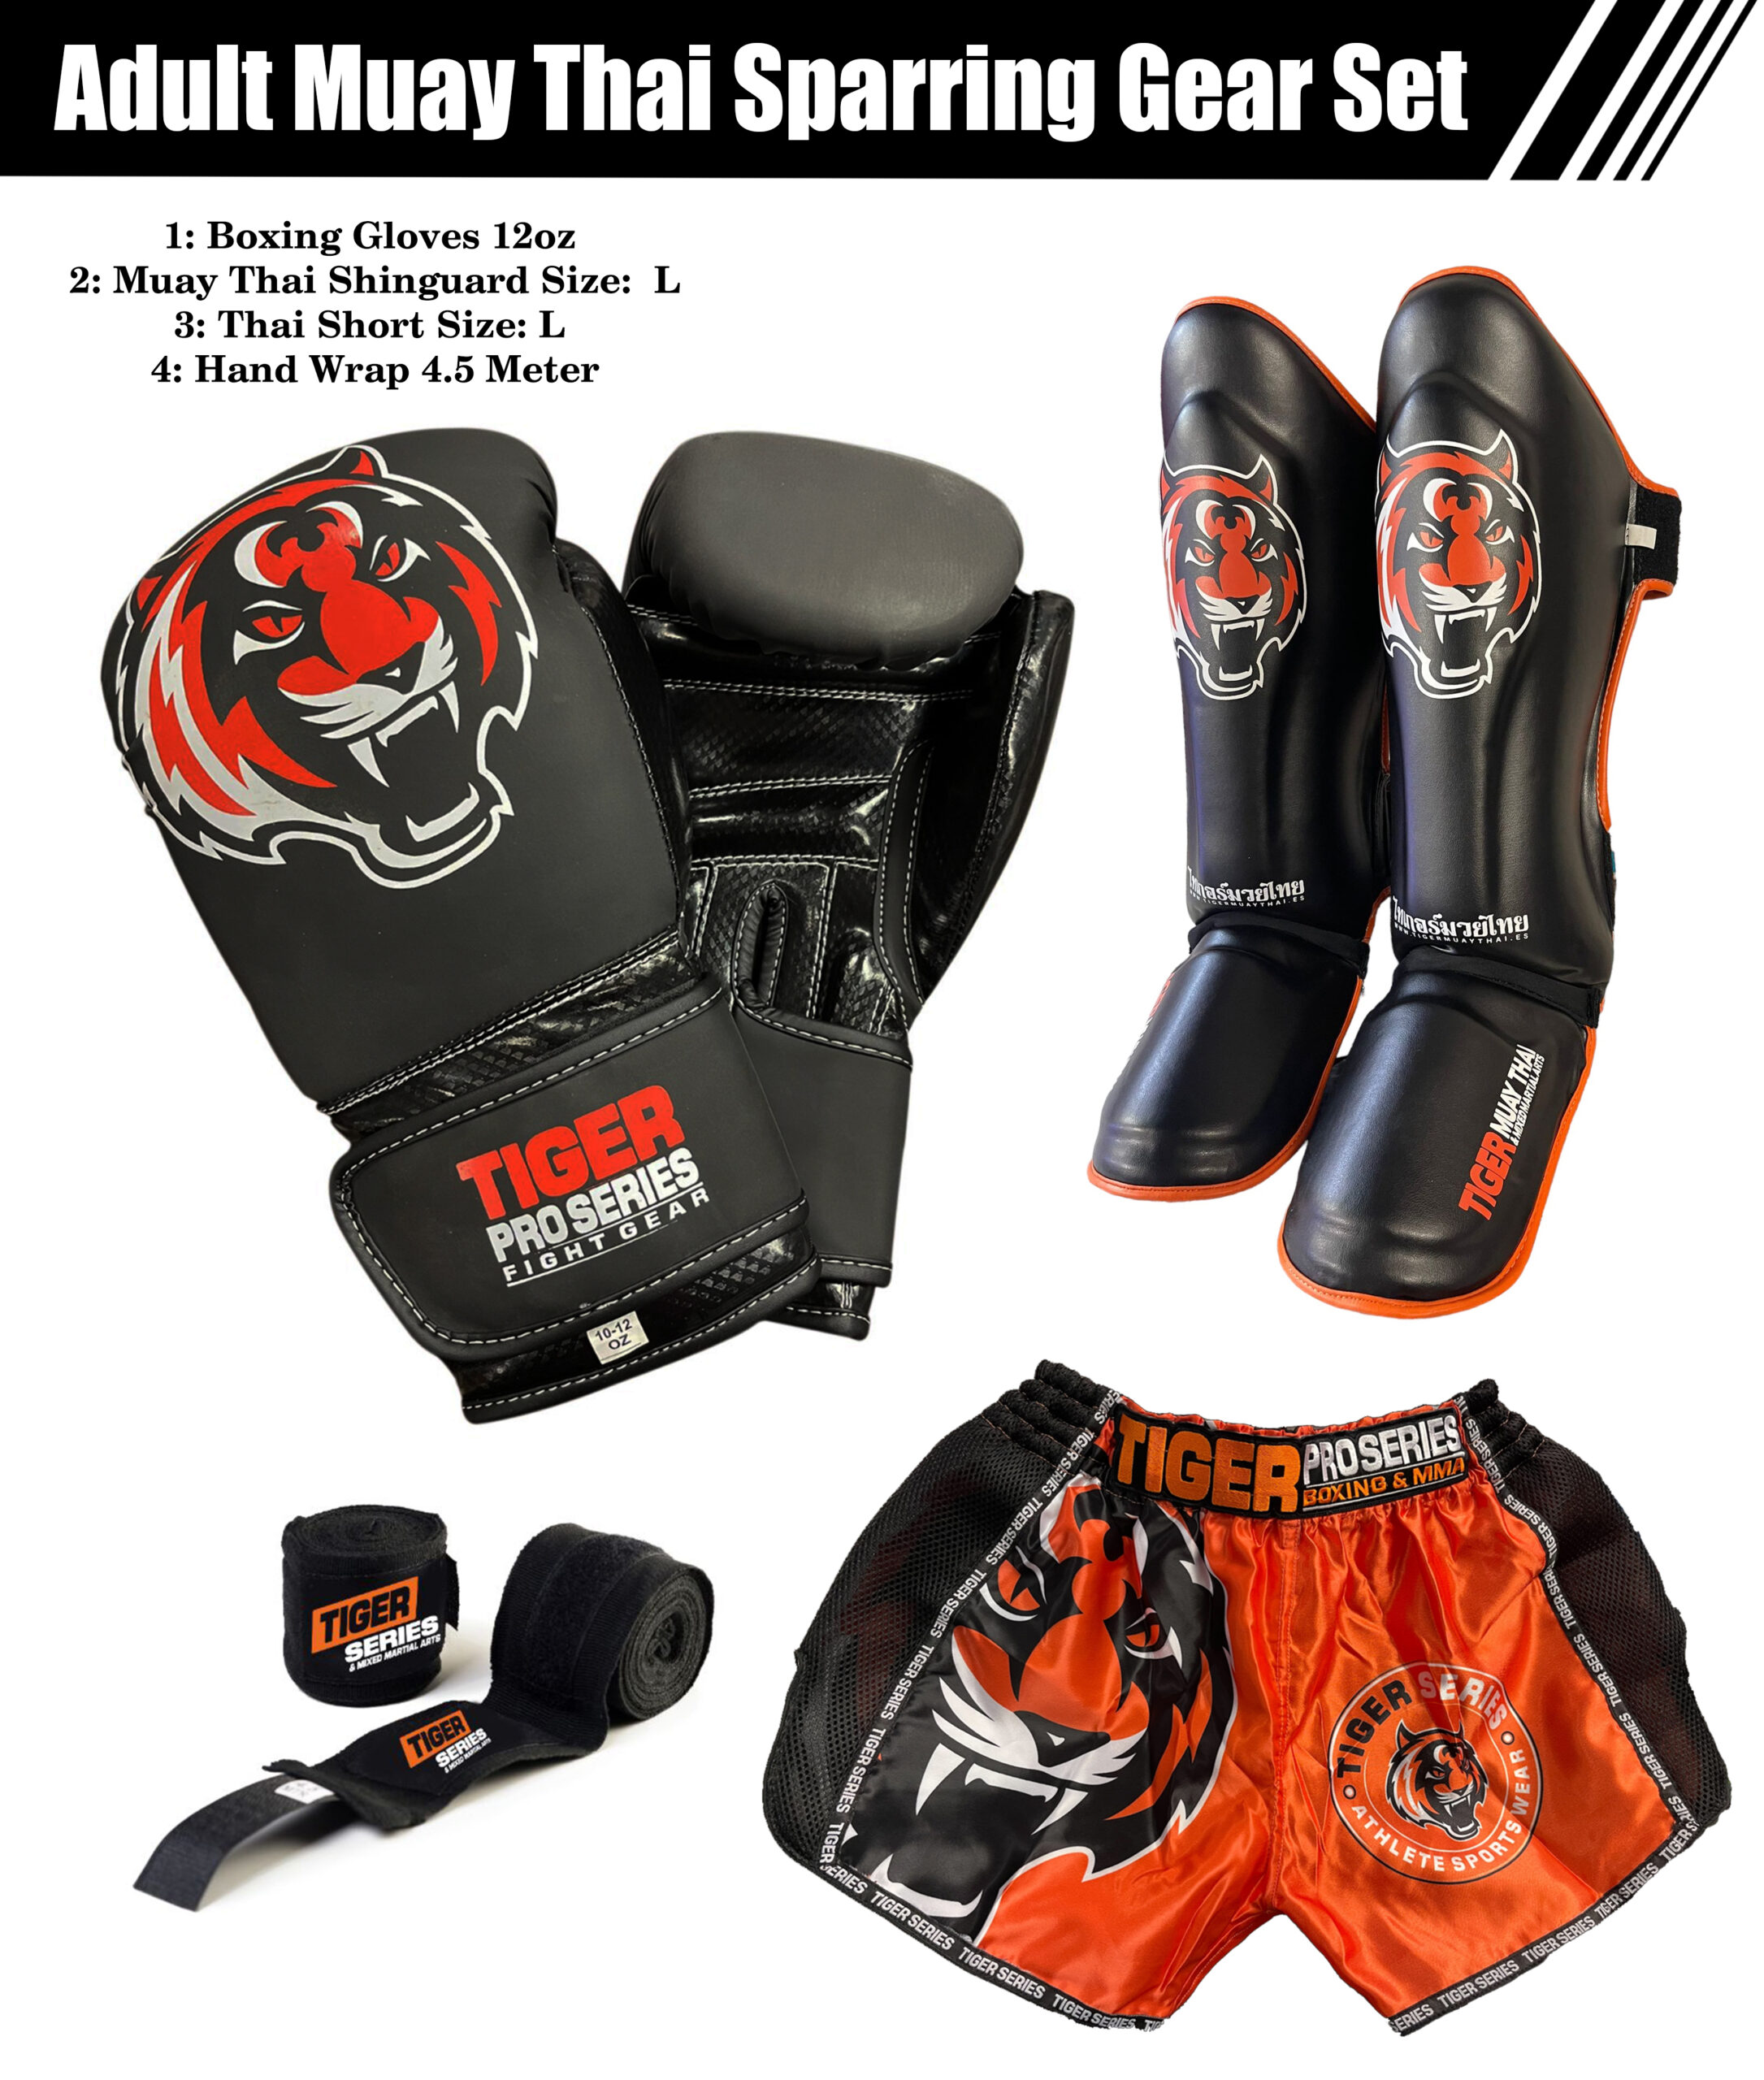 4 pair Muay Thai Boxing Sparring Set Deal